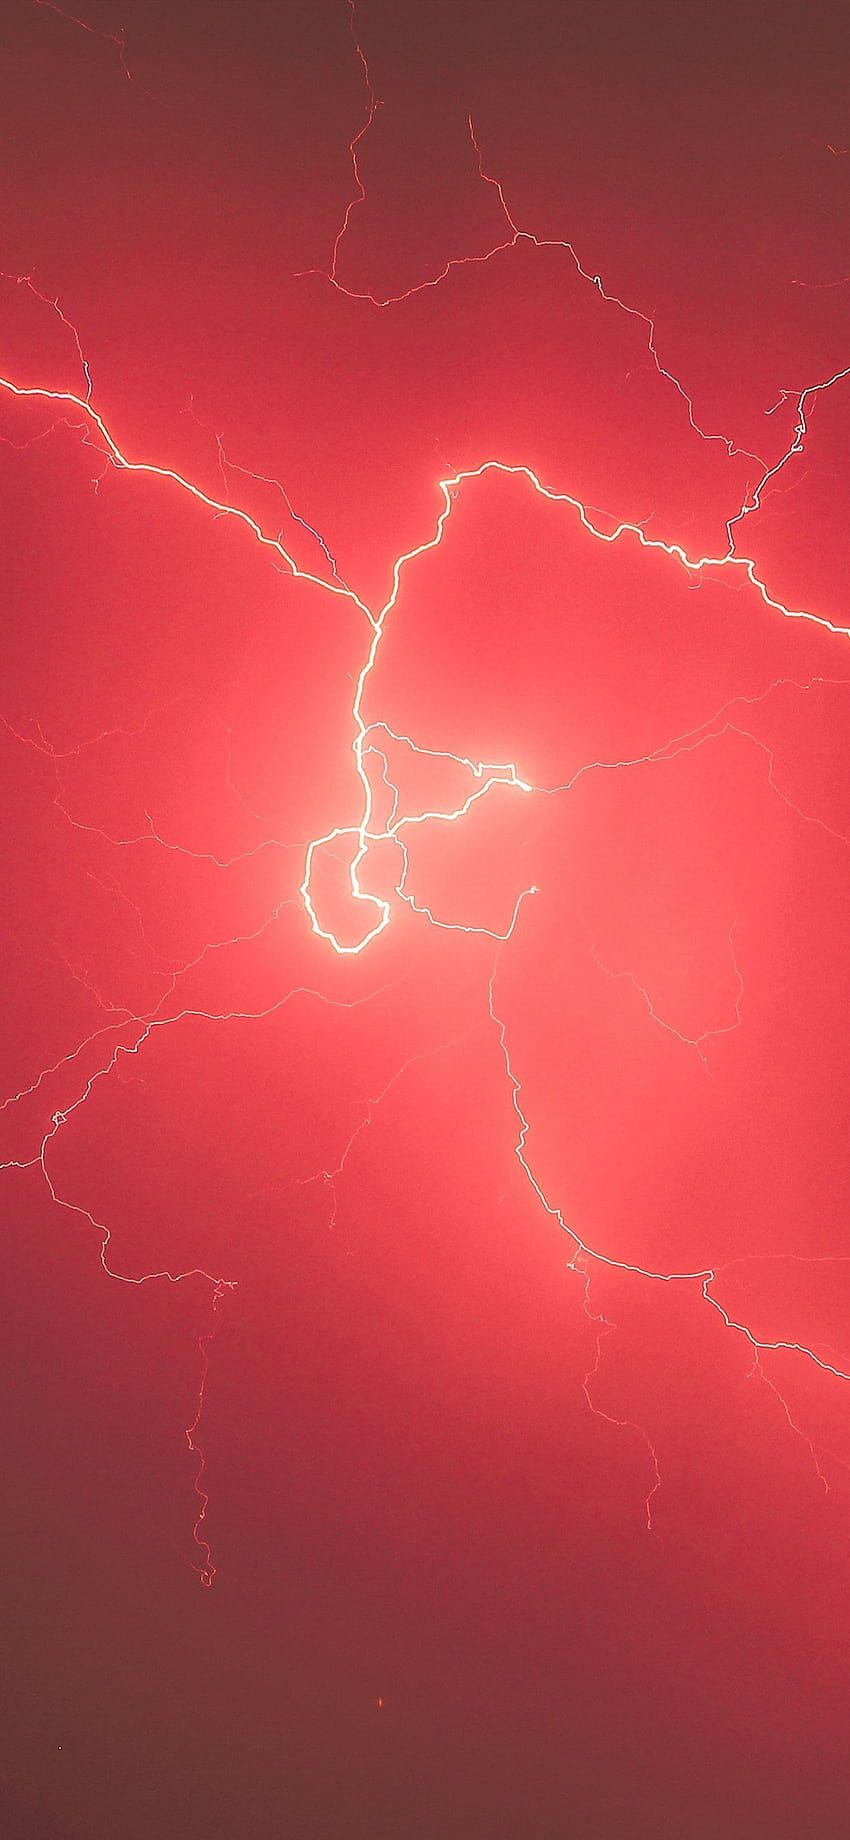 Red lightning wallpaper for your iPhone X from Vibe app - Lightning